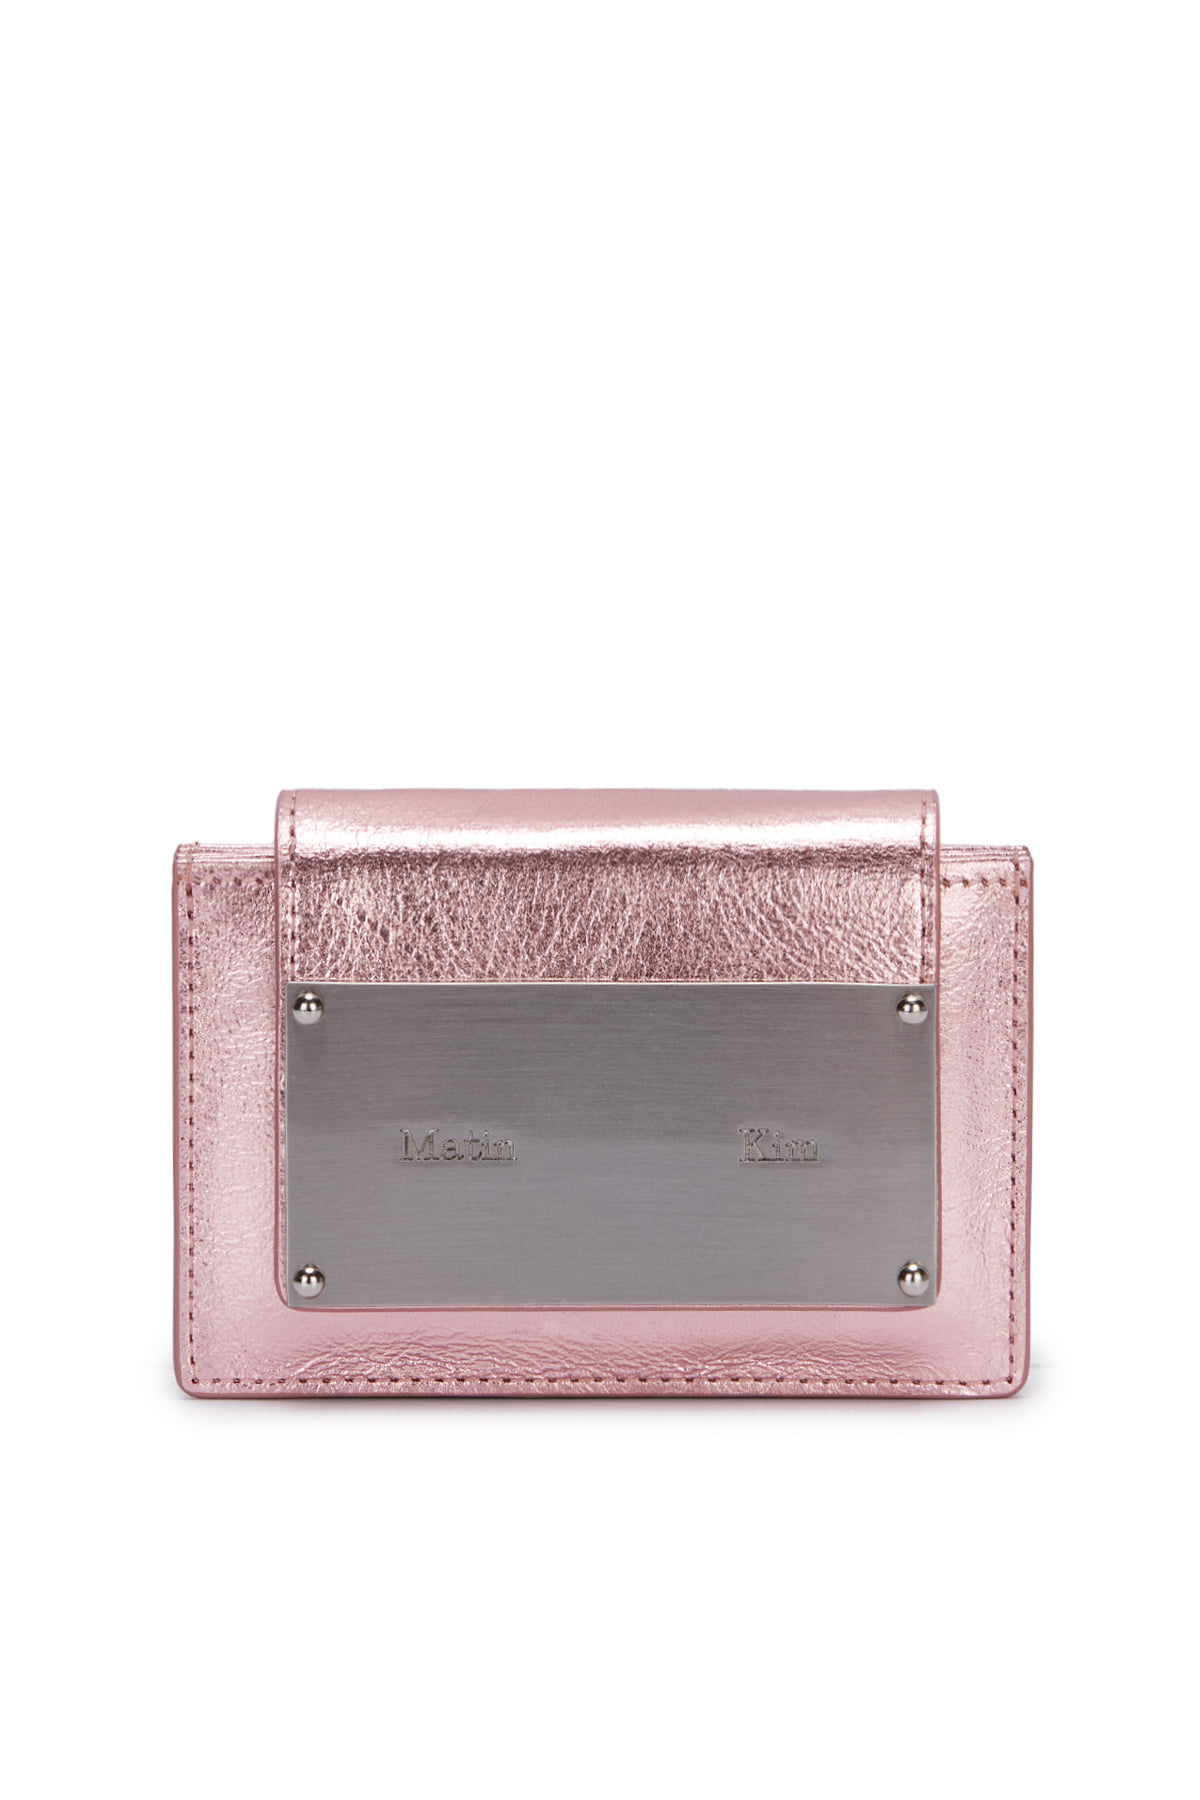 ACCORDION WALLET IN INDIAN PINK